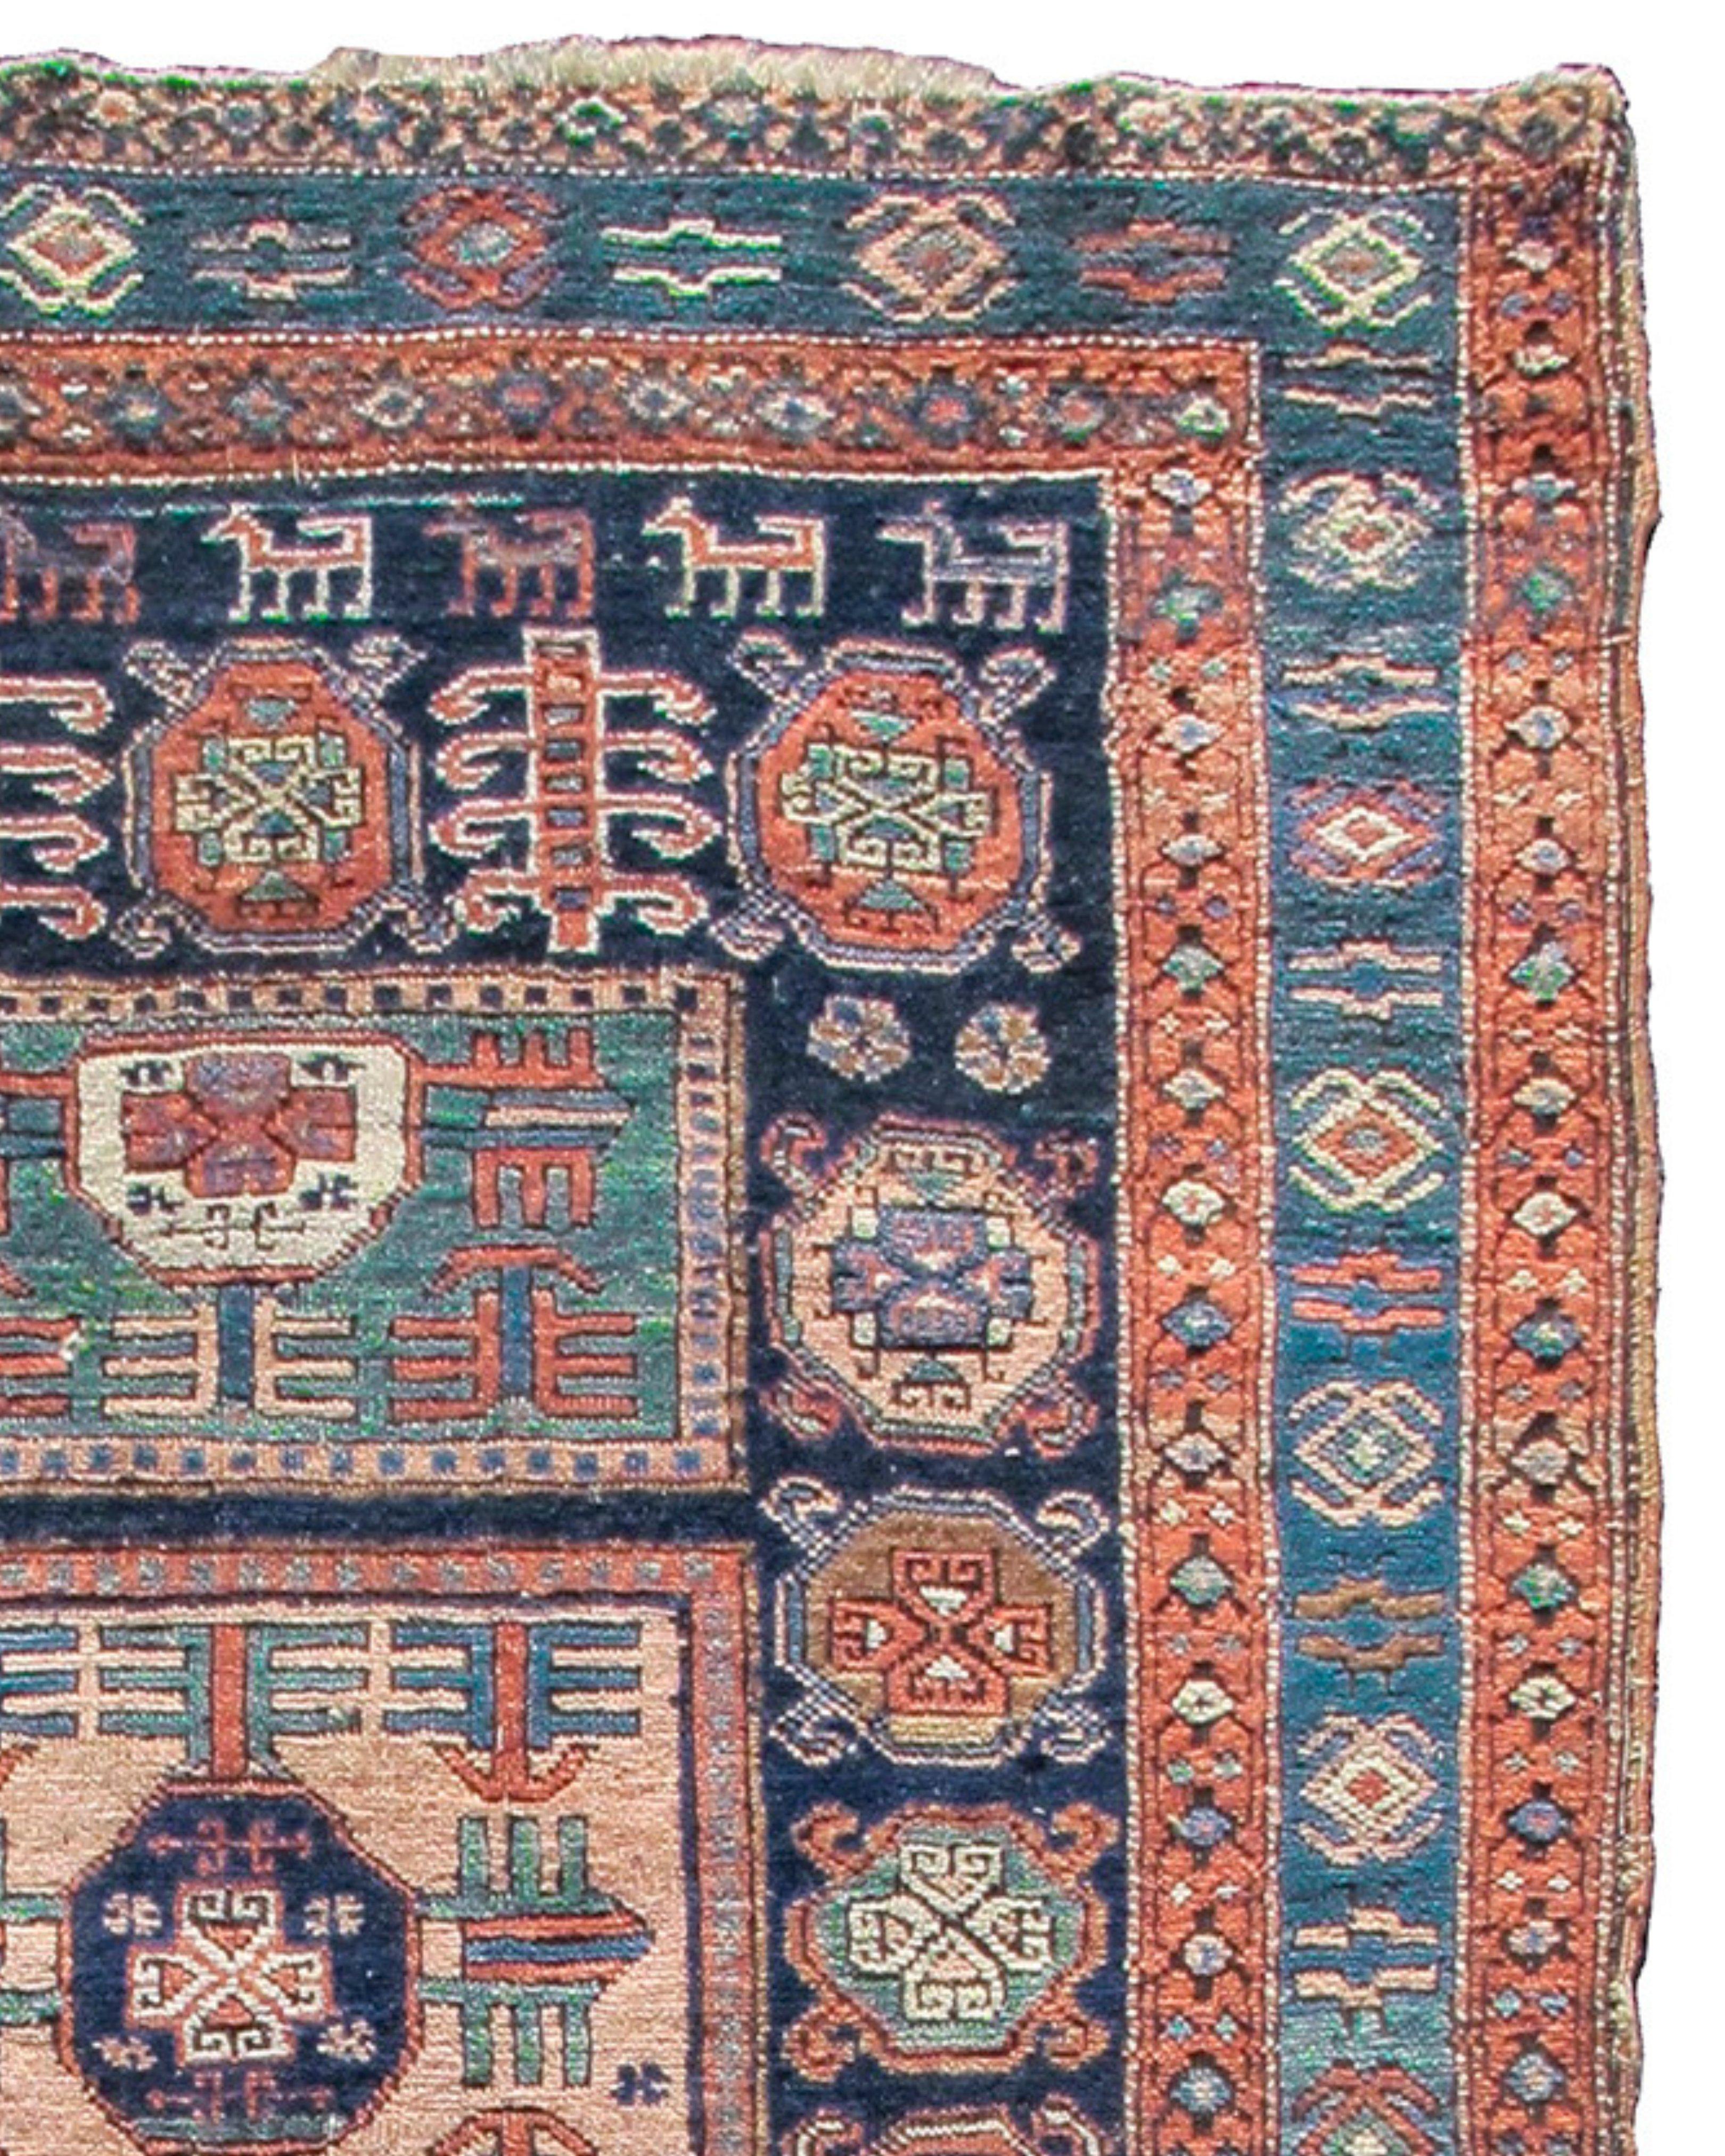 Antique Persian Heriz Rug, Early 20th century

Additional Information:
Dimensions: 3'10